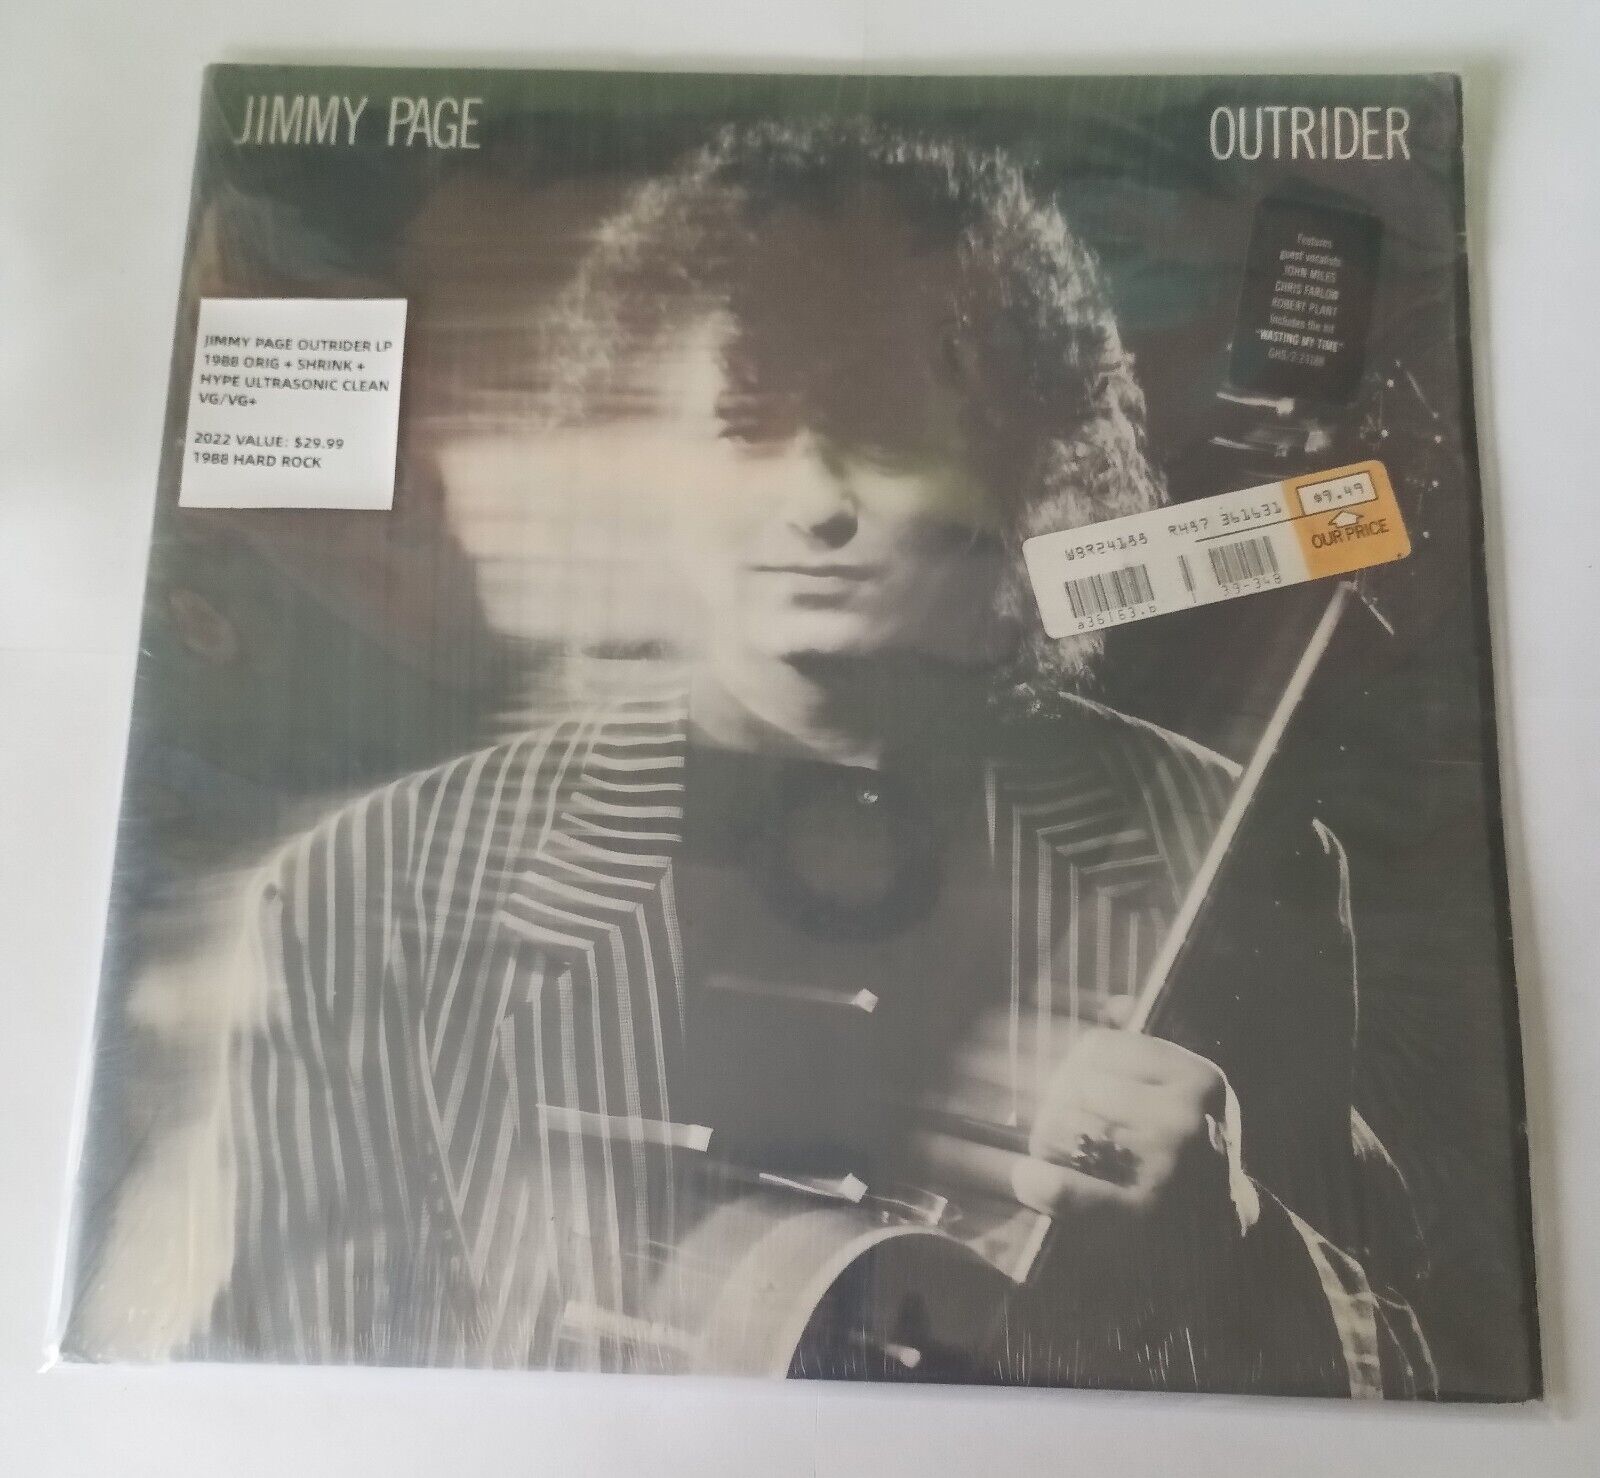 Jimmy Page Outrider Lp 1988 ORIG + SHRINK & HYPE Ultrasonic Clean VG/VG+